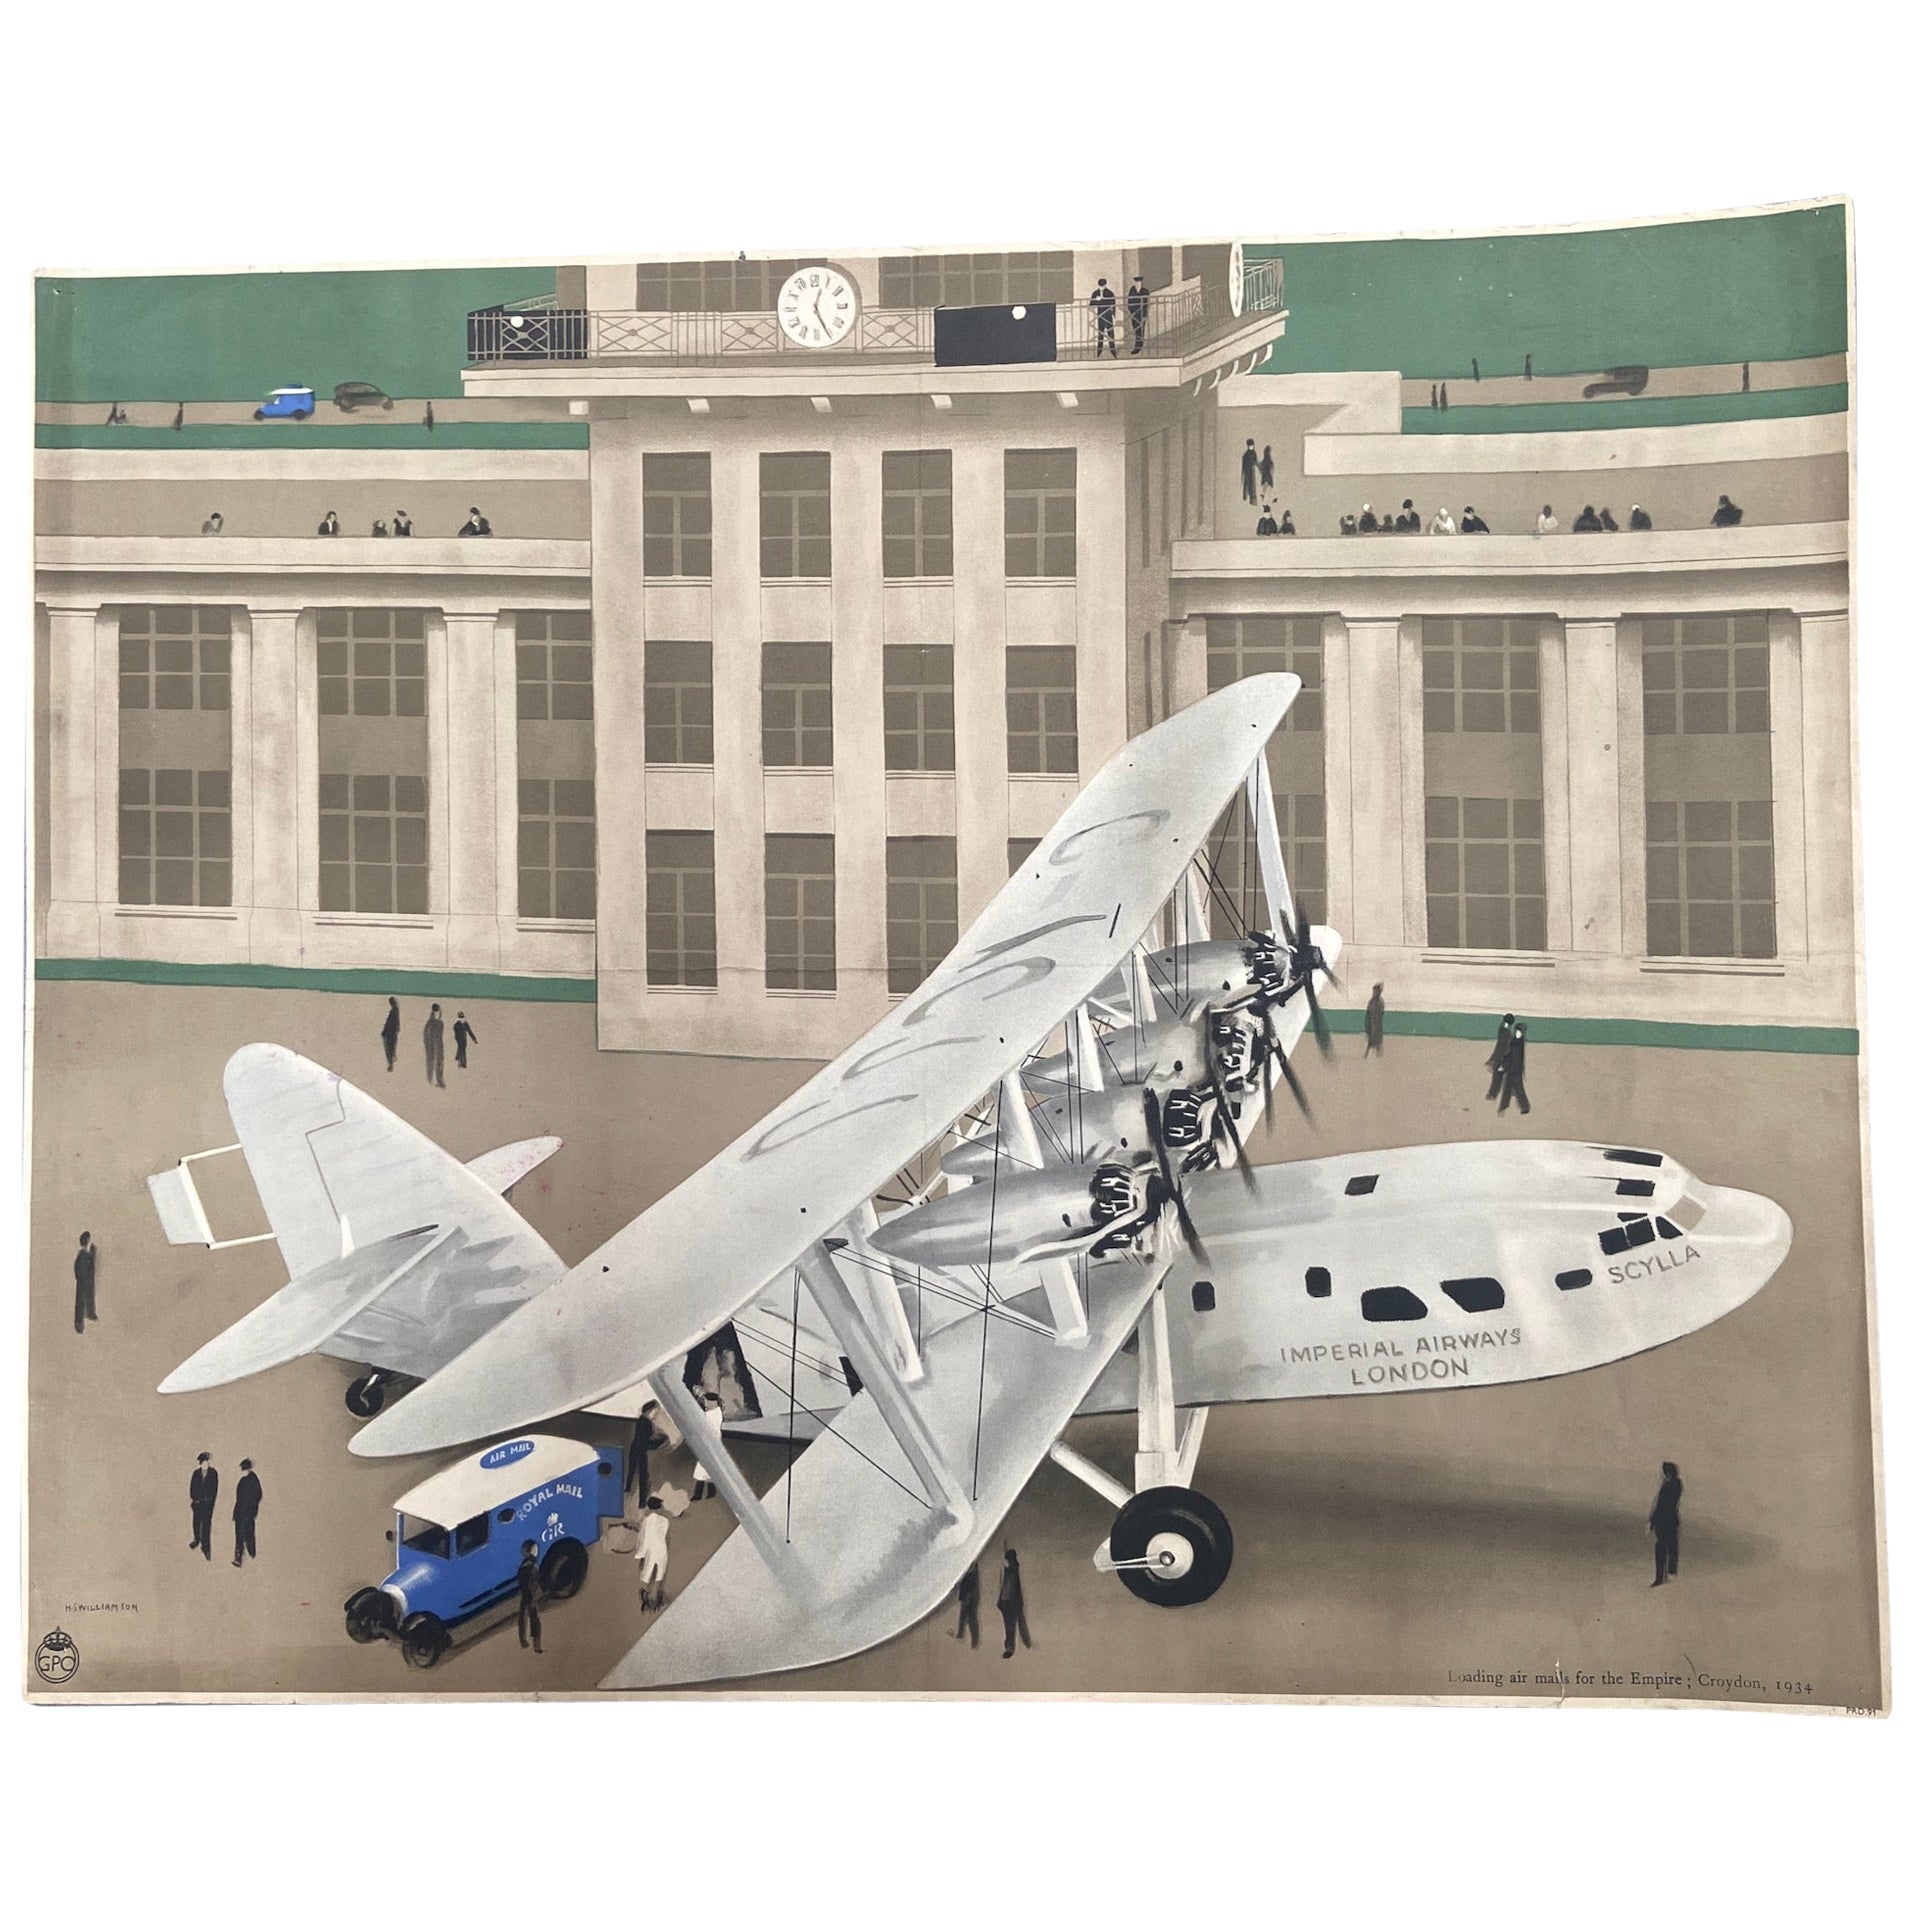 Imperial airways GPO poster by H S Williamson, original 1934 coloured lithograph